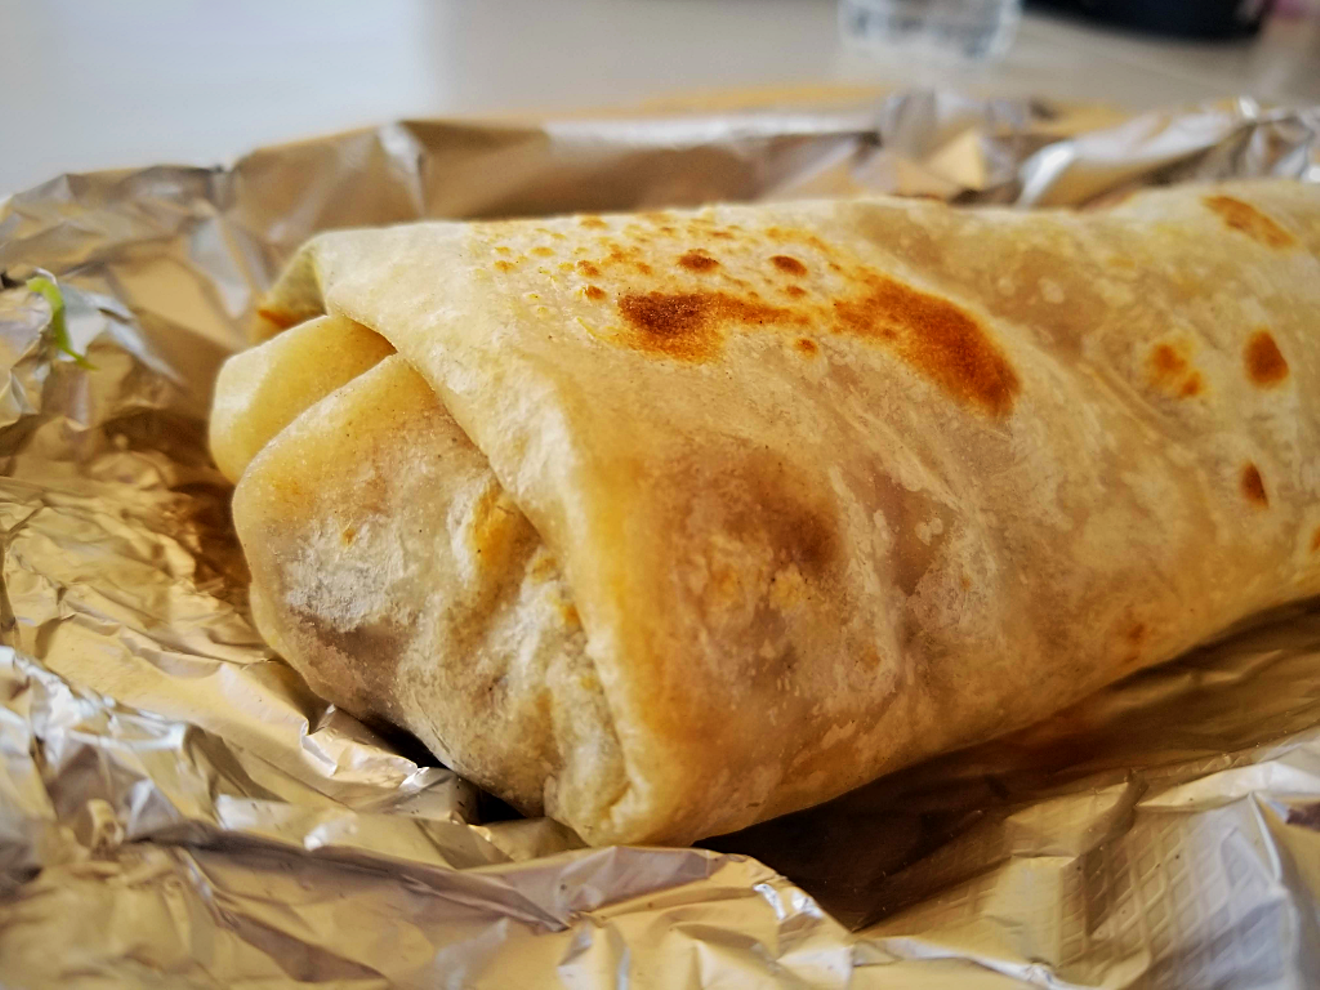 Is this the most famous gas station burrito in Phoenix?